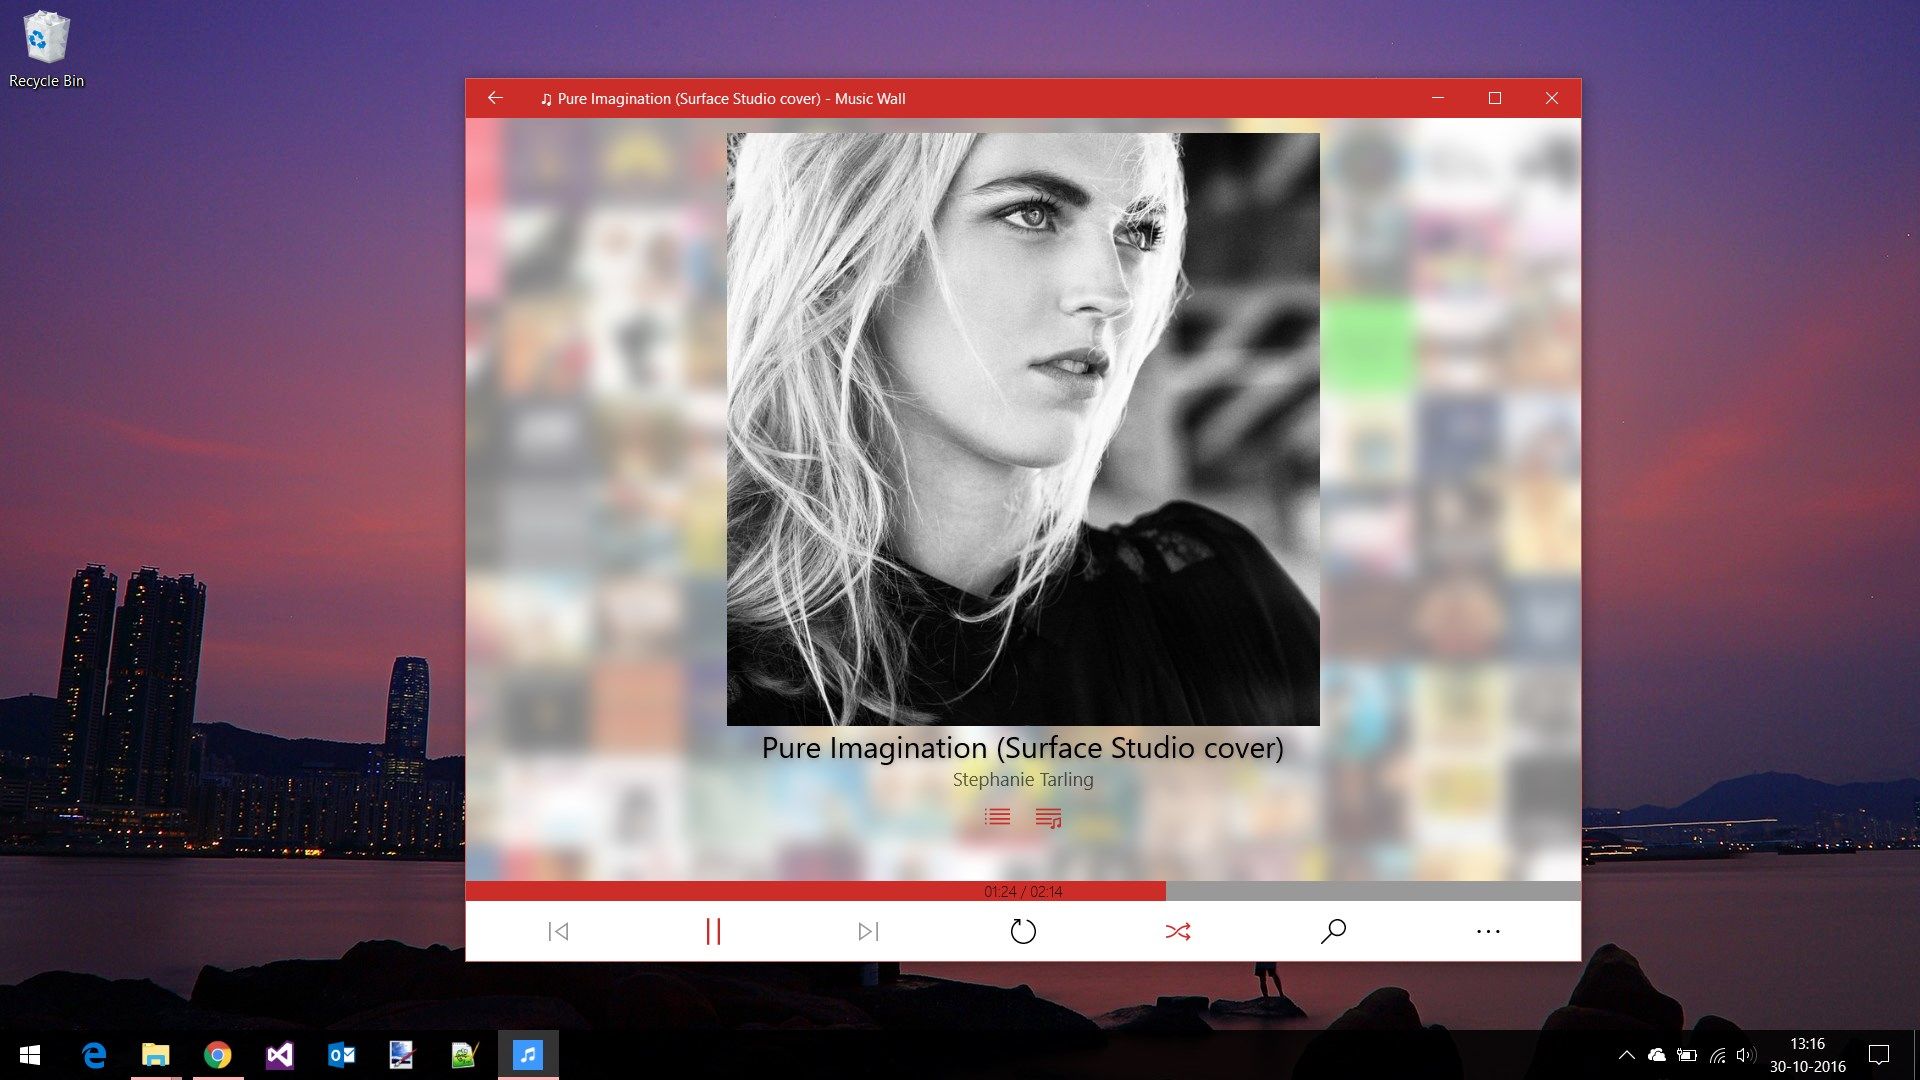 Now Playing Screen with option to manage now playing queue & view lyrics (if saved in track's tag)